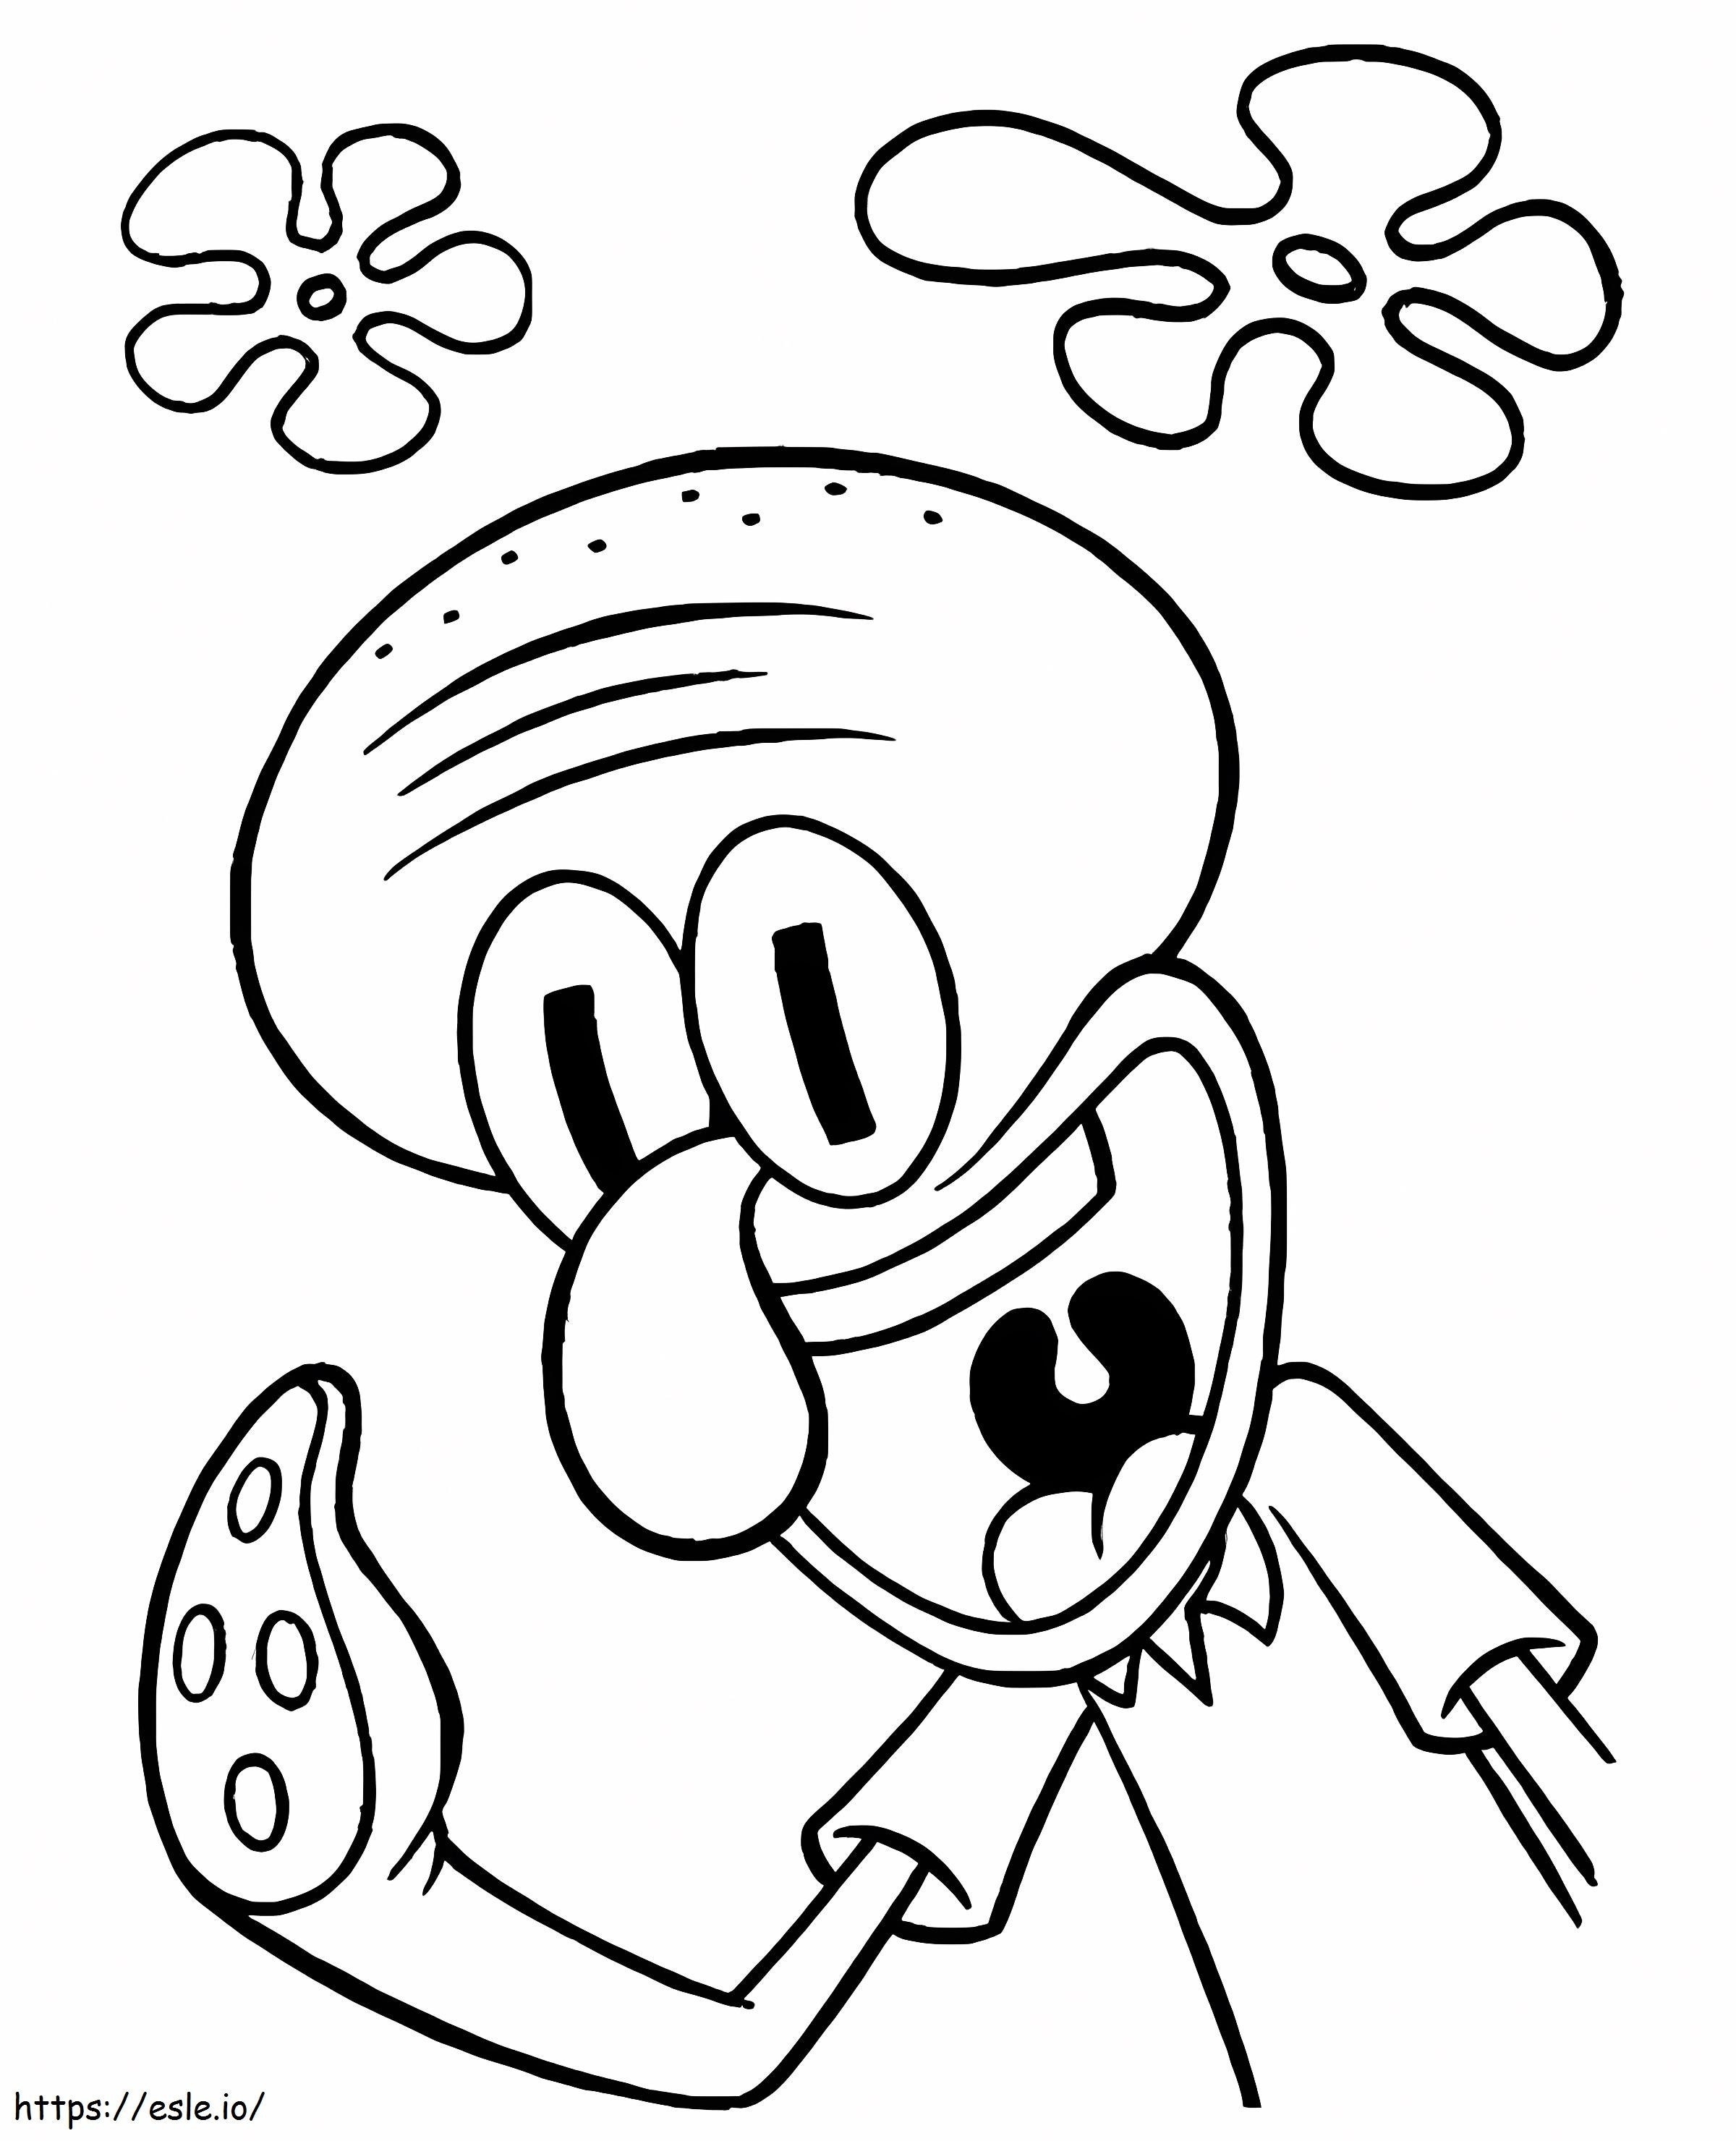 Squidward Waving Hand coloring page